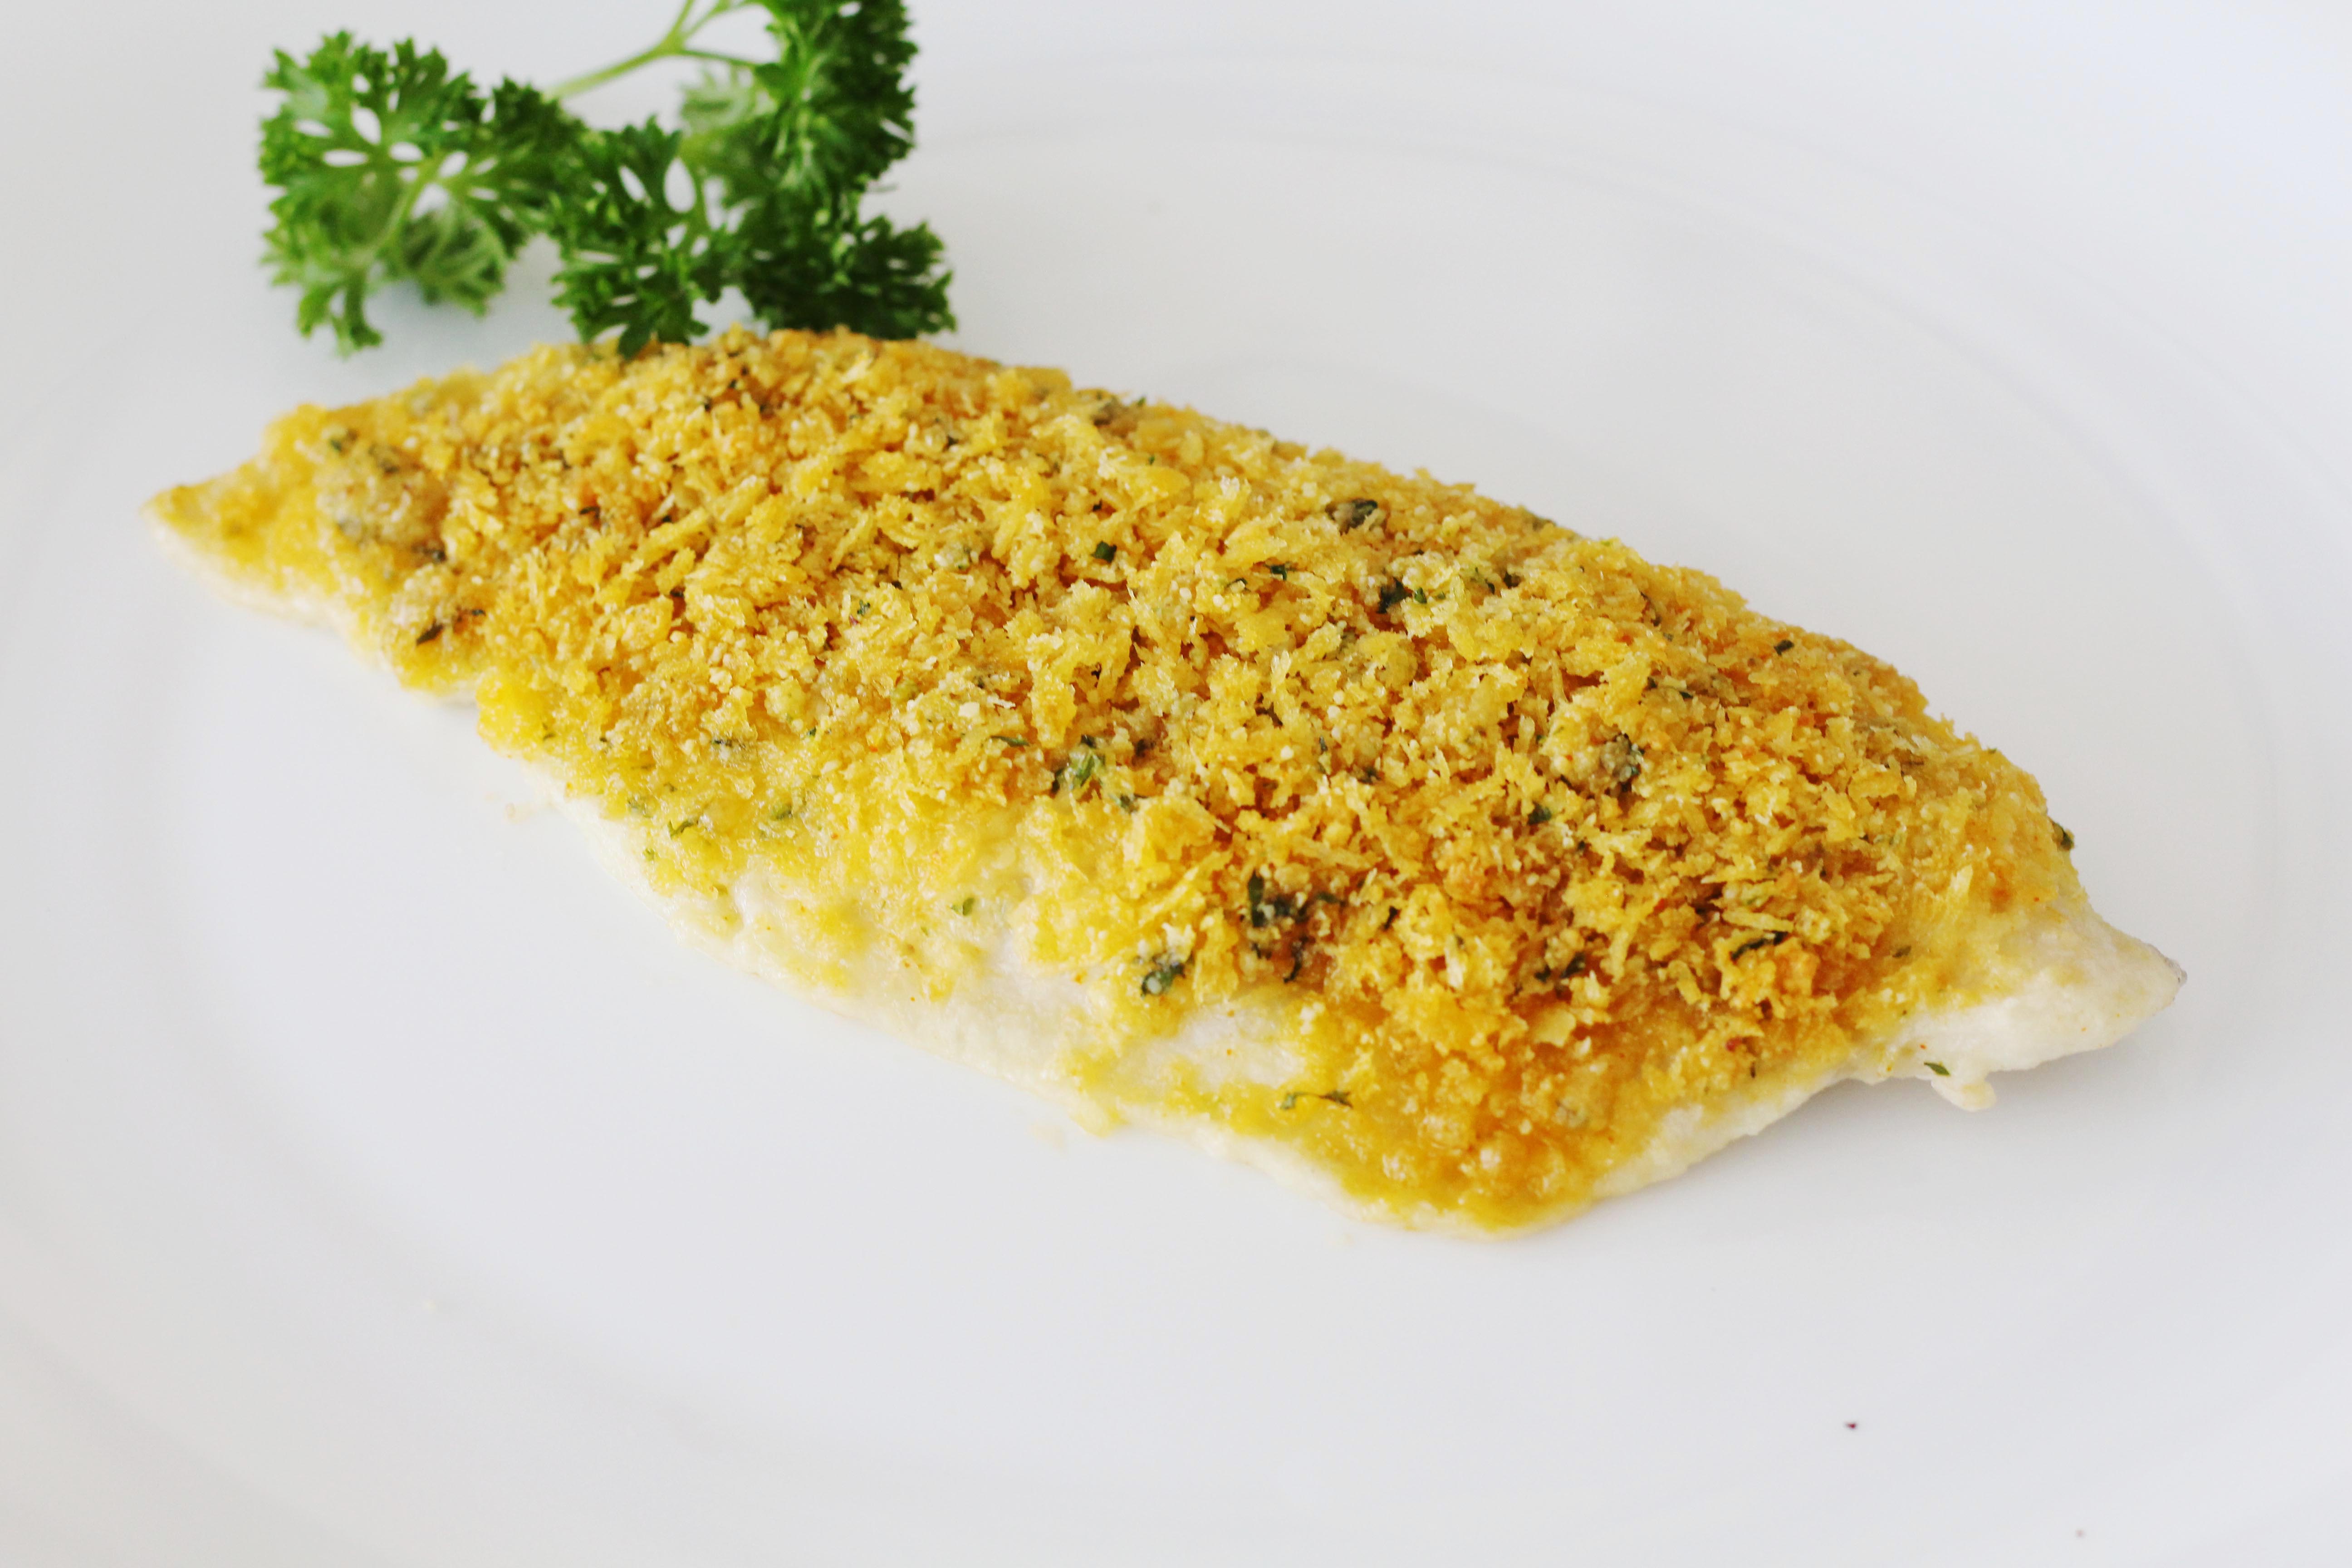 Crusted fish fillets